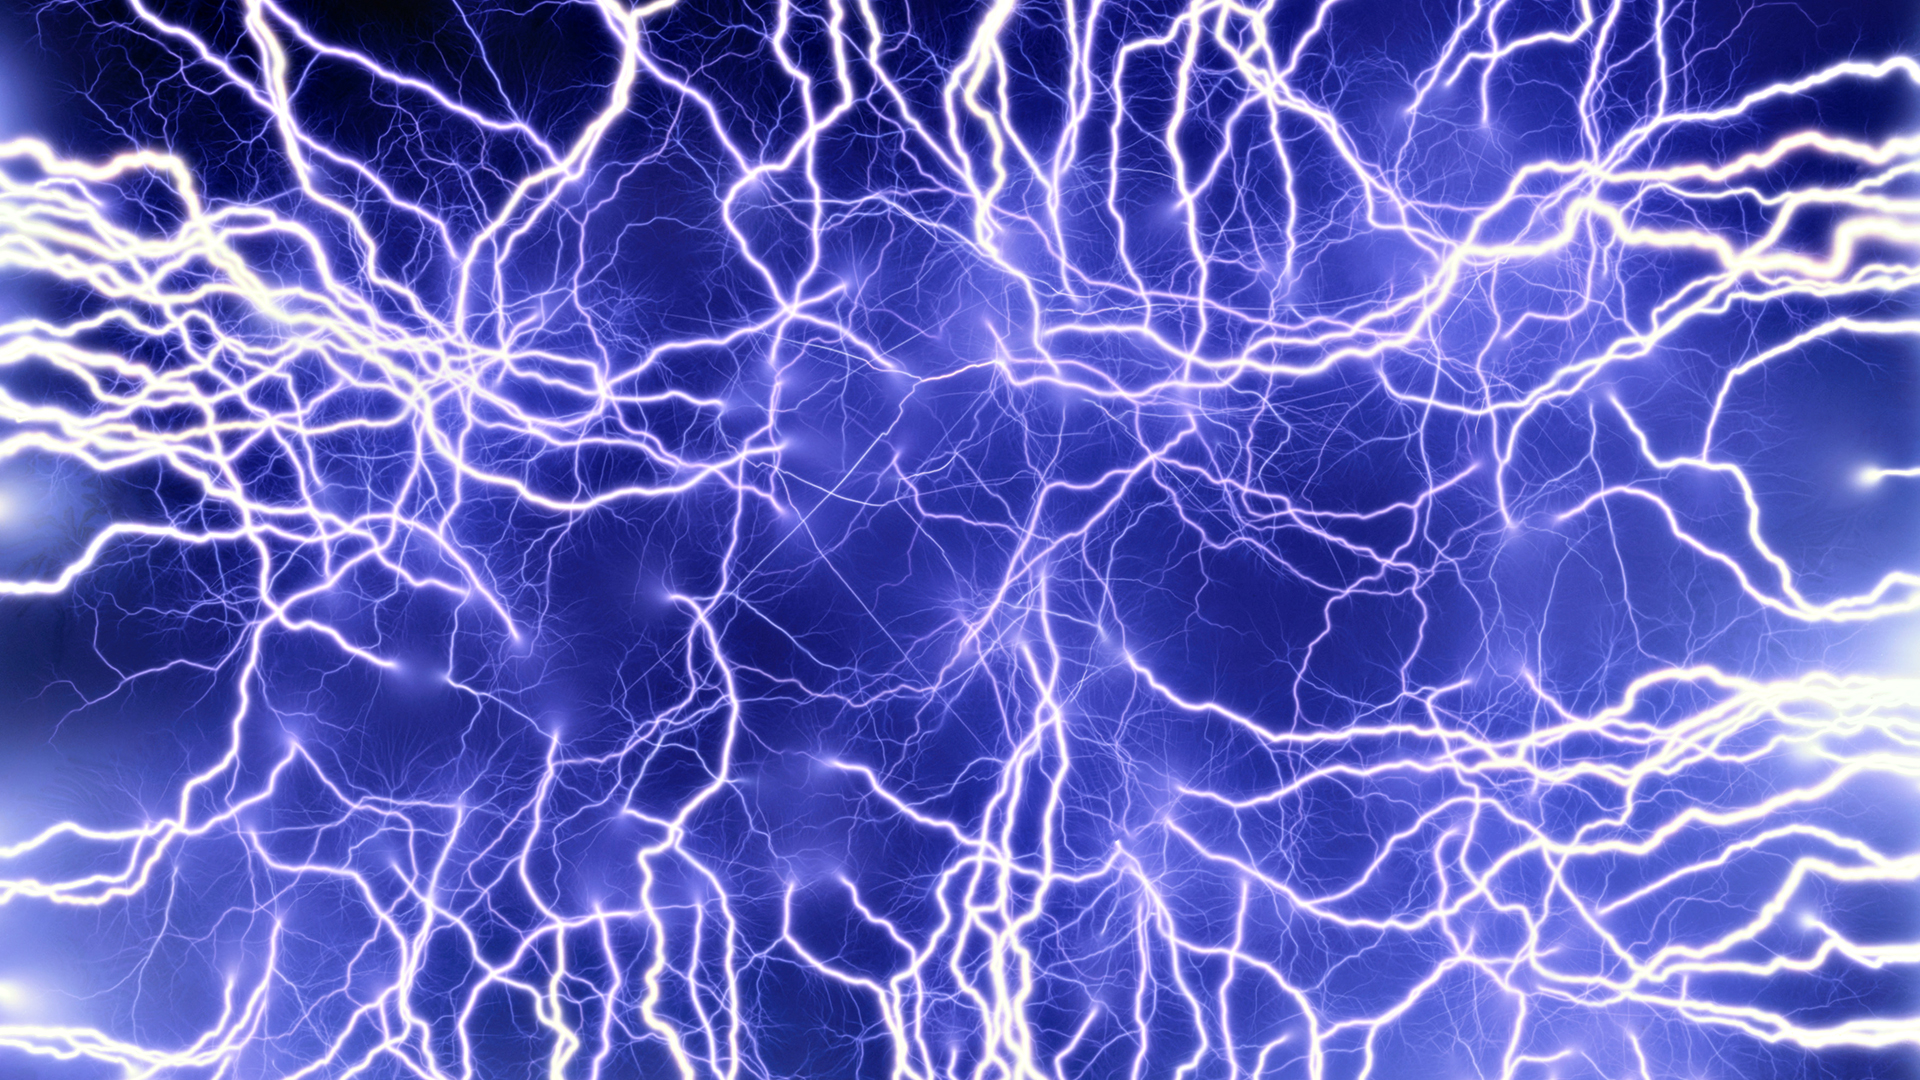 Red And Blue Lightning Wallpapers